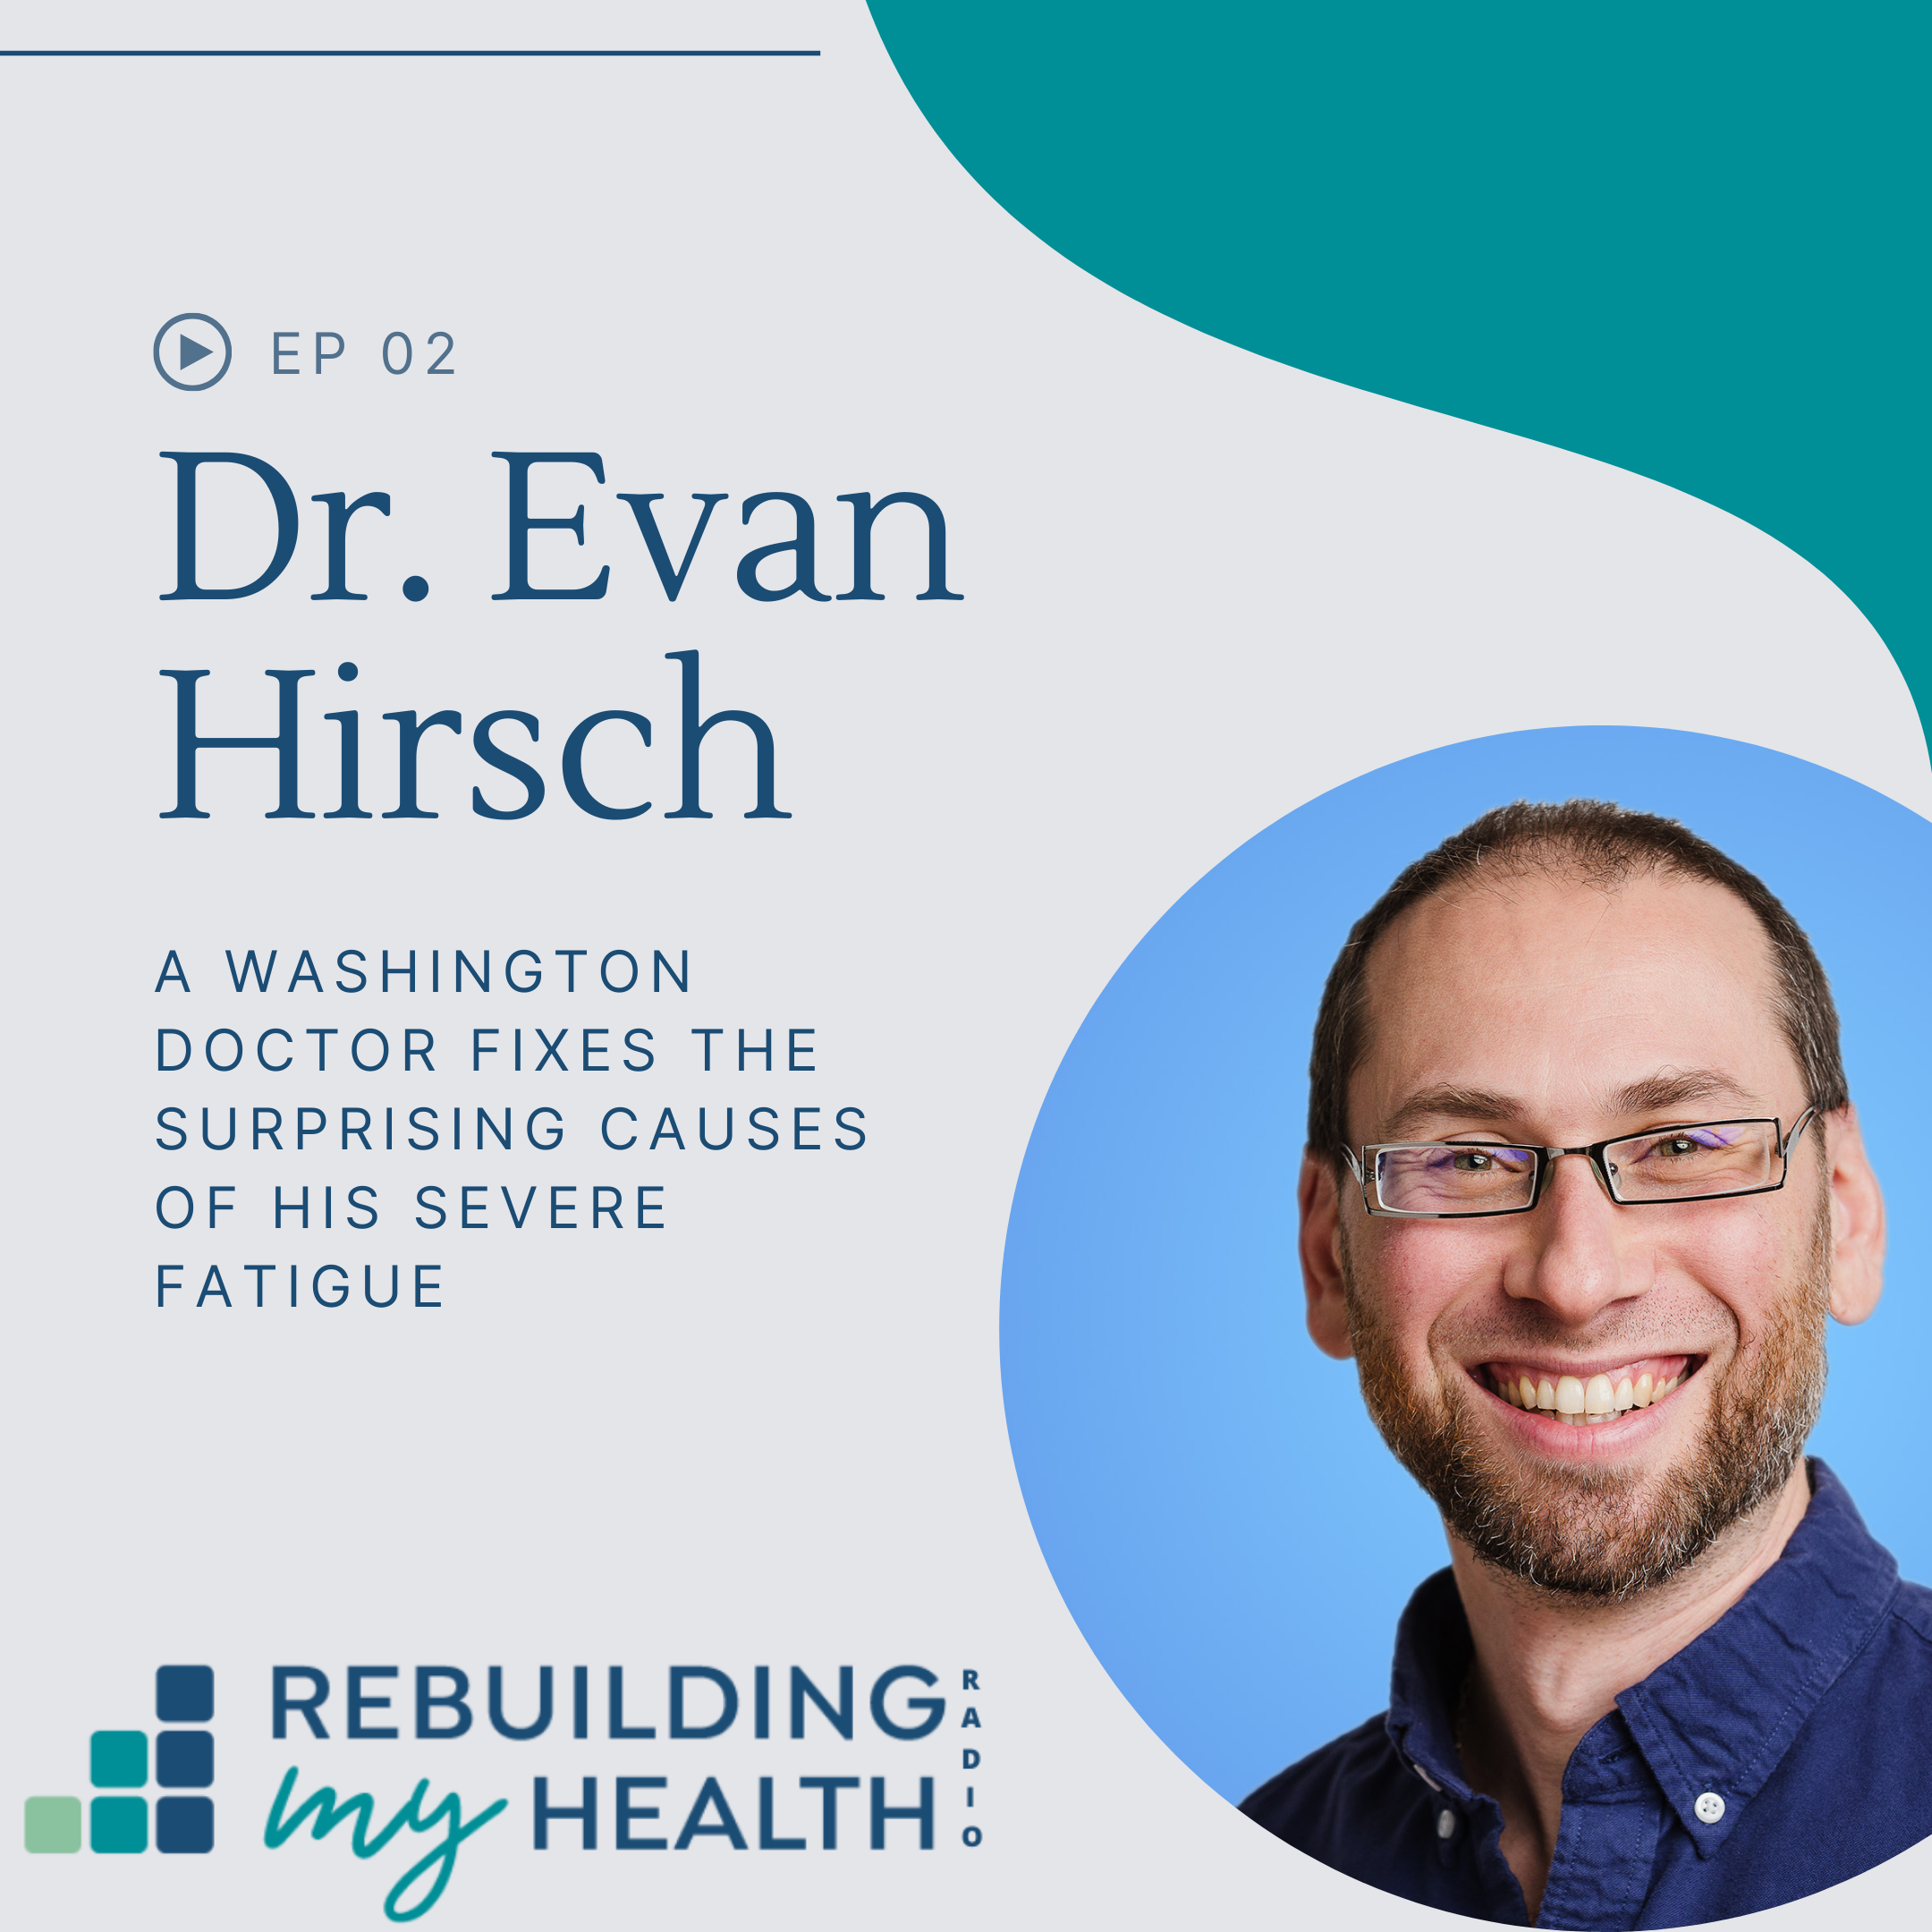 In this podcast interview with Dr. Evan Hirsch, learn how he uncovered the top causes of severe fatigue, including hormonal dysfunction, mold and metals toxicity, and infections.